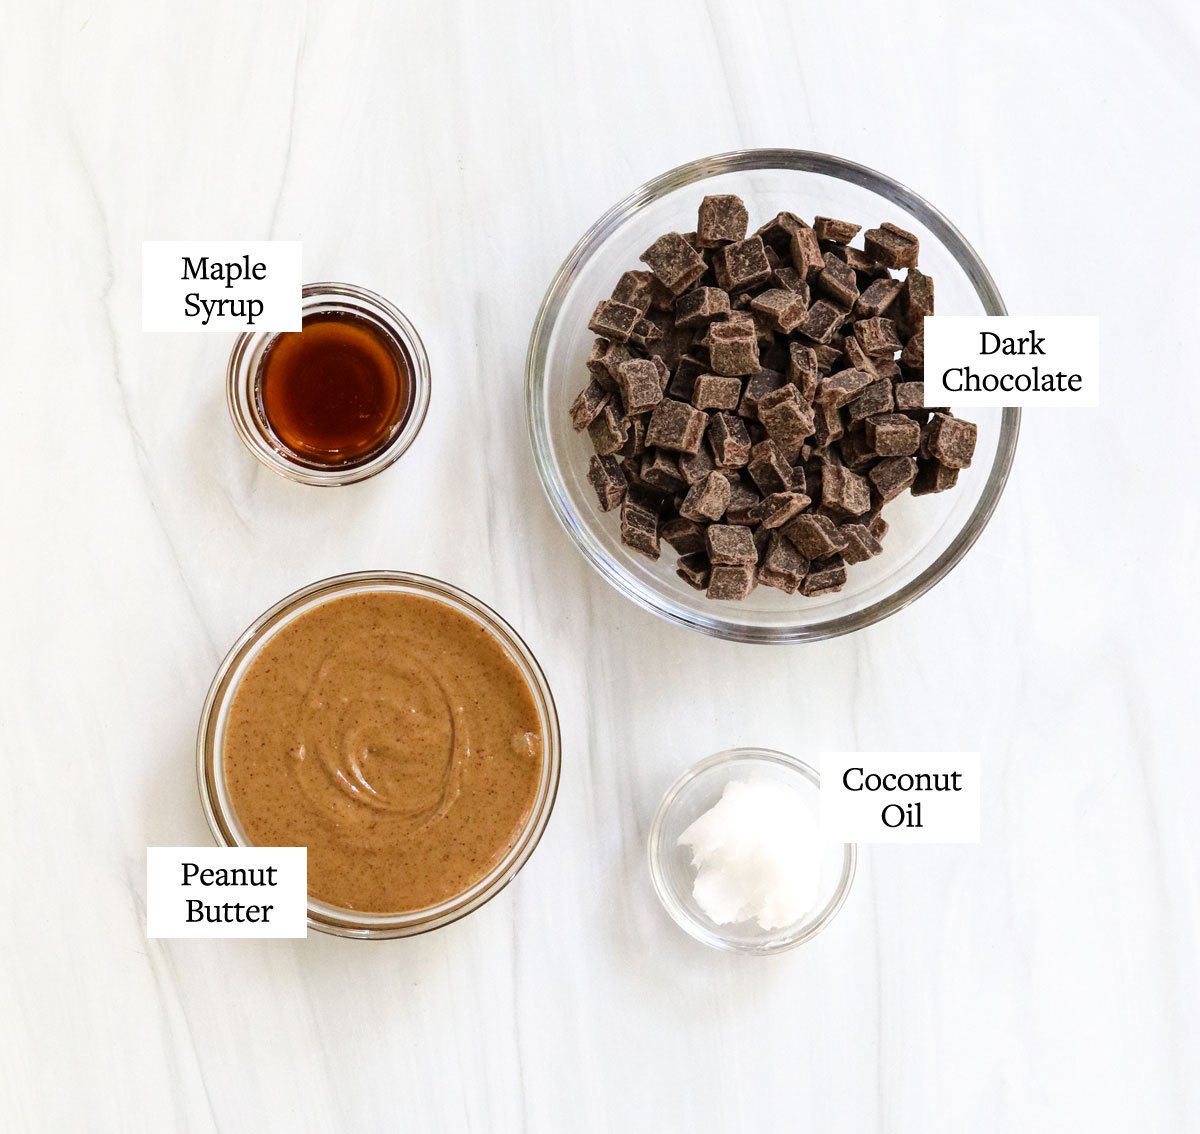 peanut butter cup ingredients labeled in glass bowls.